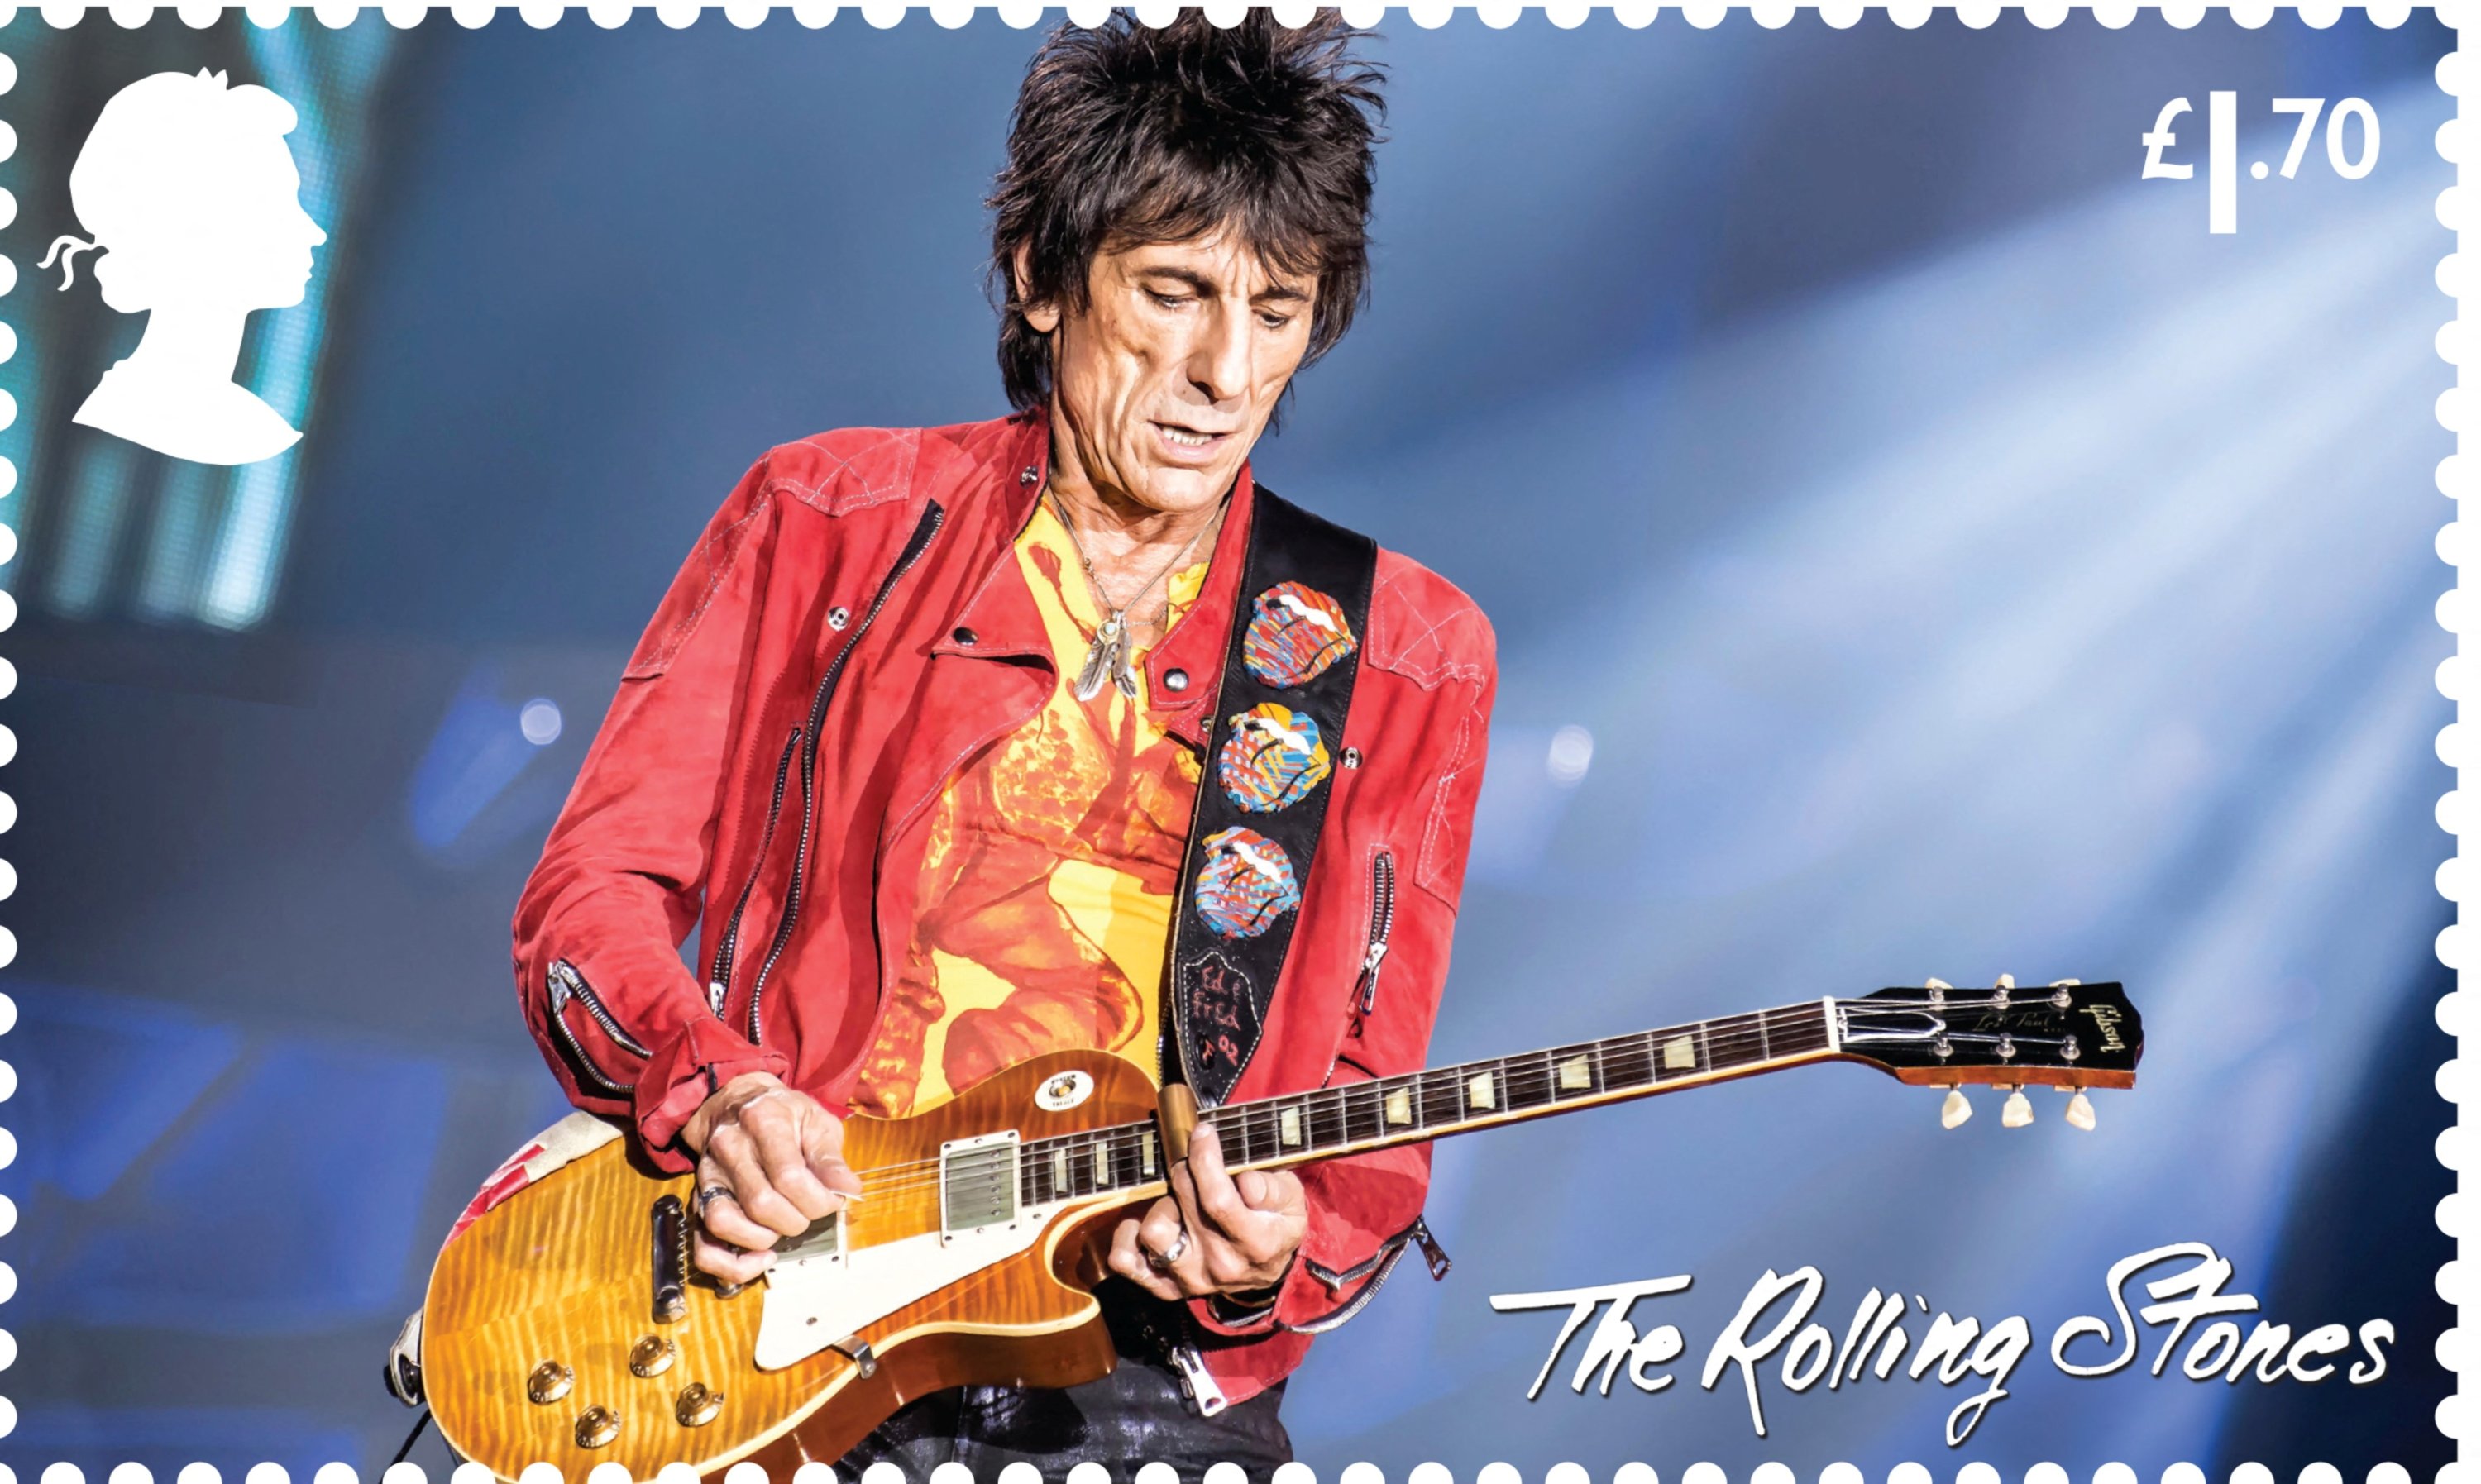 One of the dedicated Royal Mail stamps to honor 60 years of the legendary rock group The Rolling Stones is seen in this undated handout image. (REUTERS)